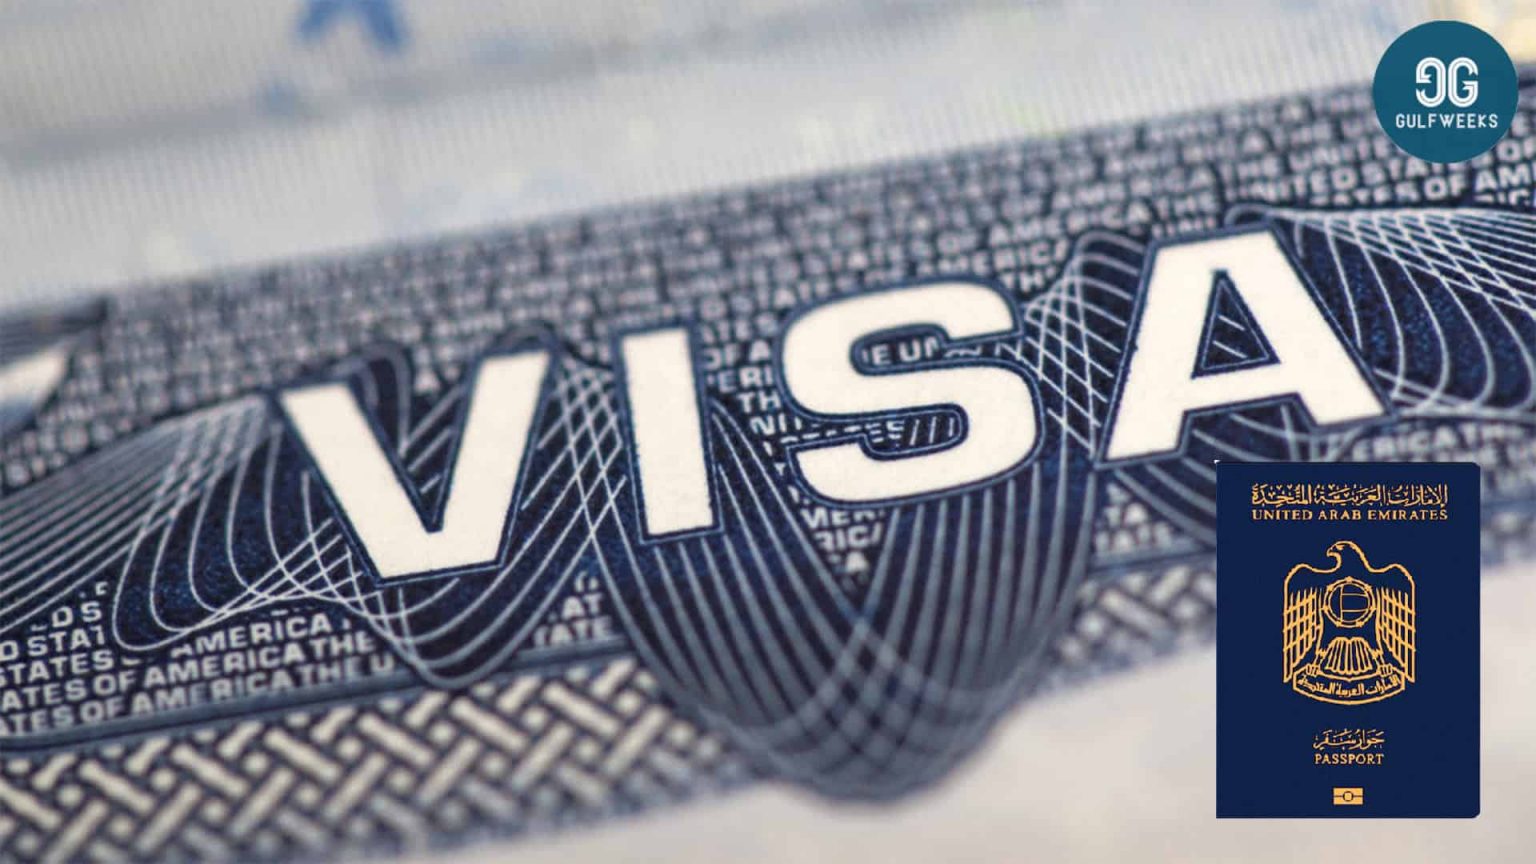 uae visit visa fees for 3 months without exit